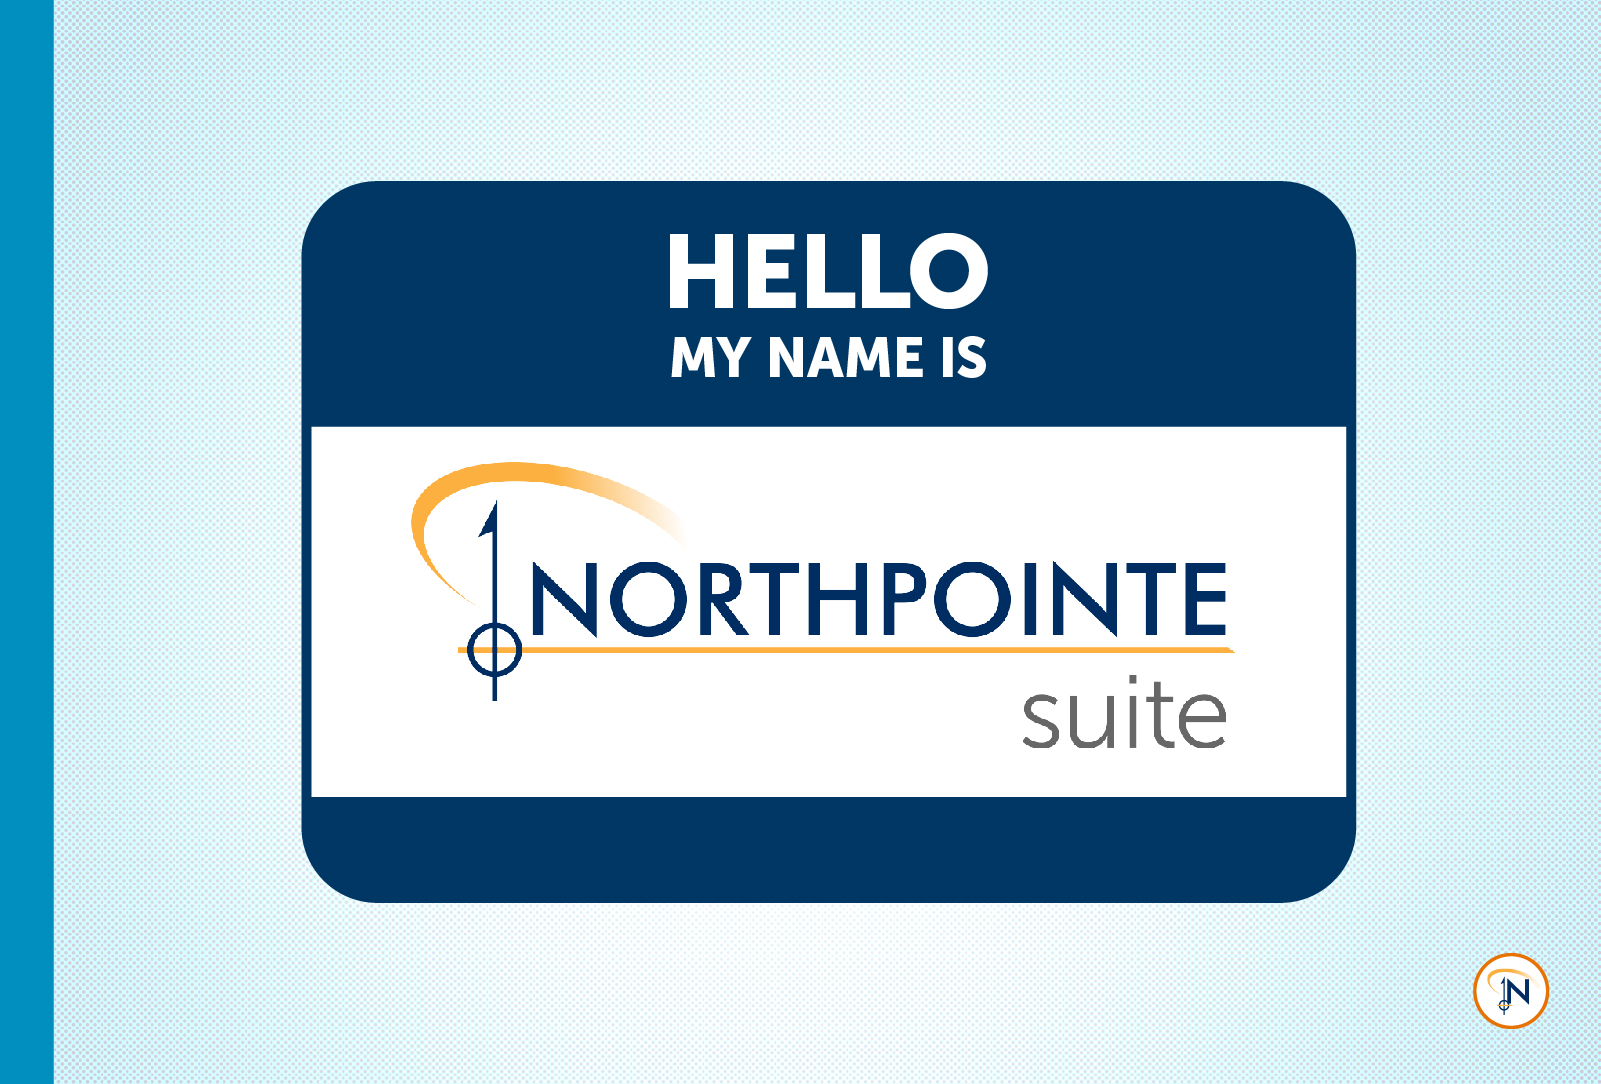 Get to Know the Northpointe Suite